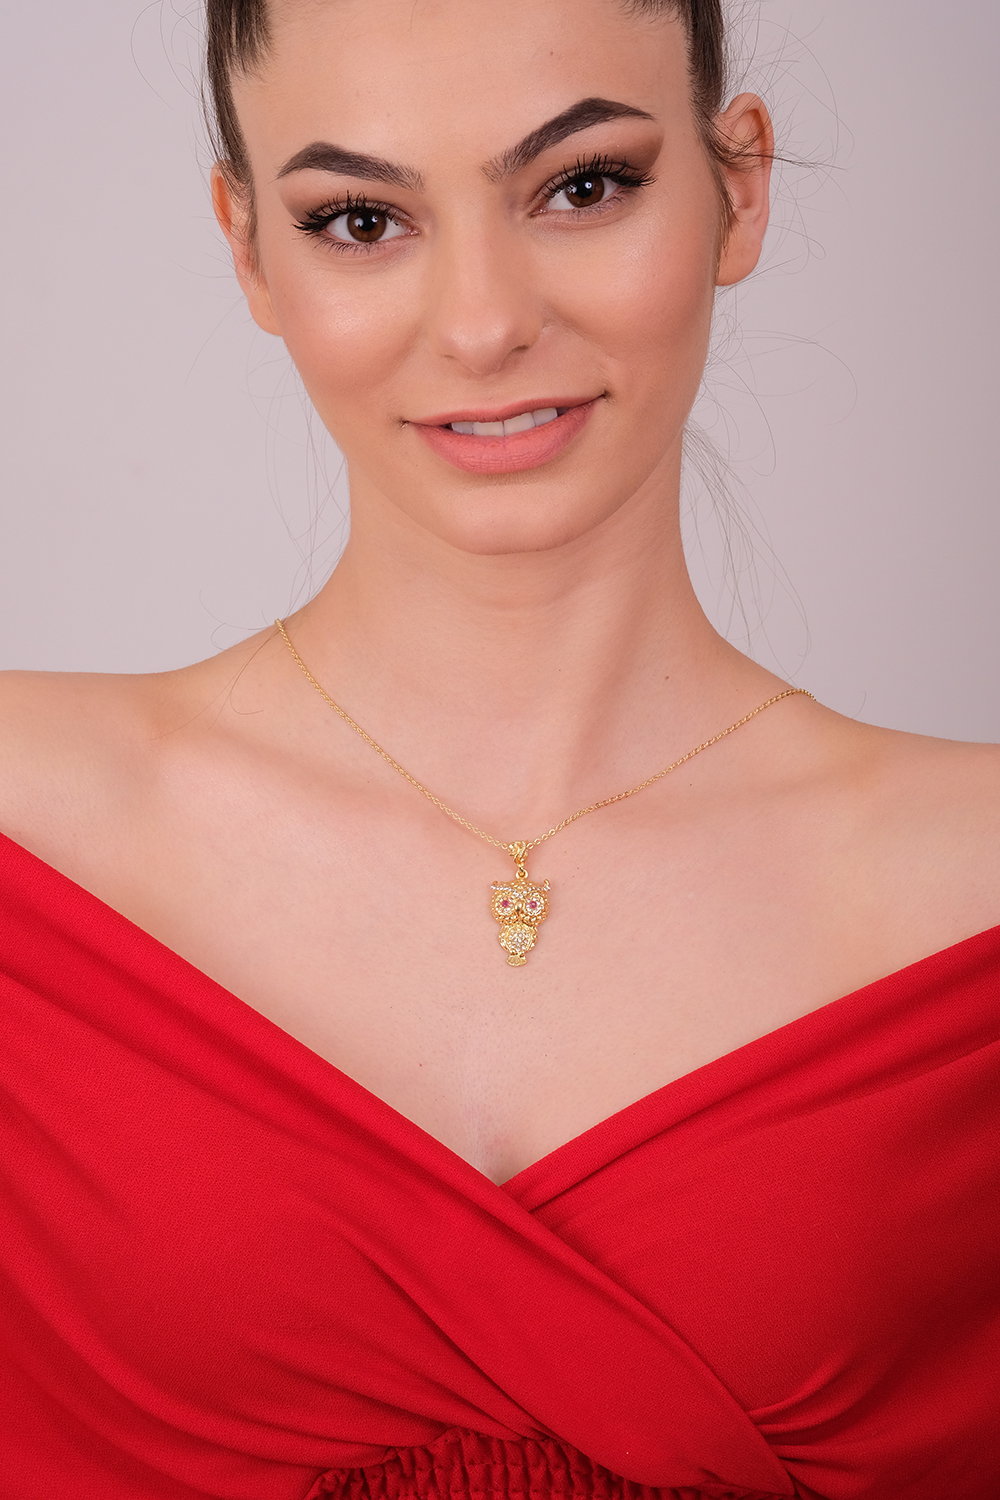 ATHENA Necklace-Gold Plated